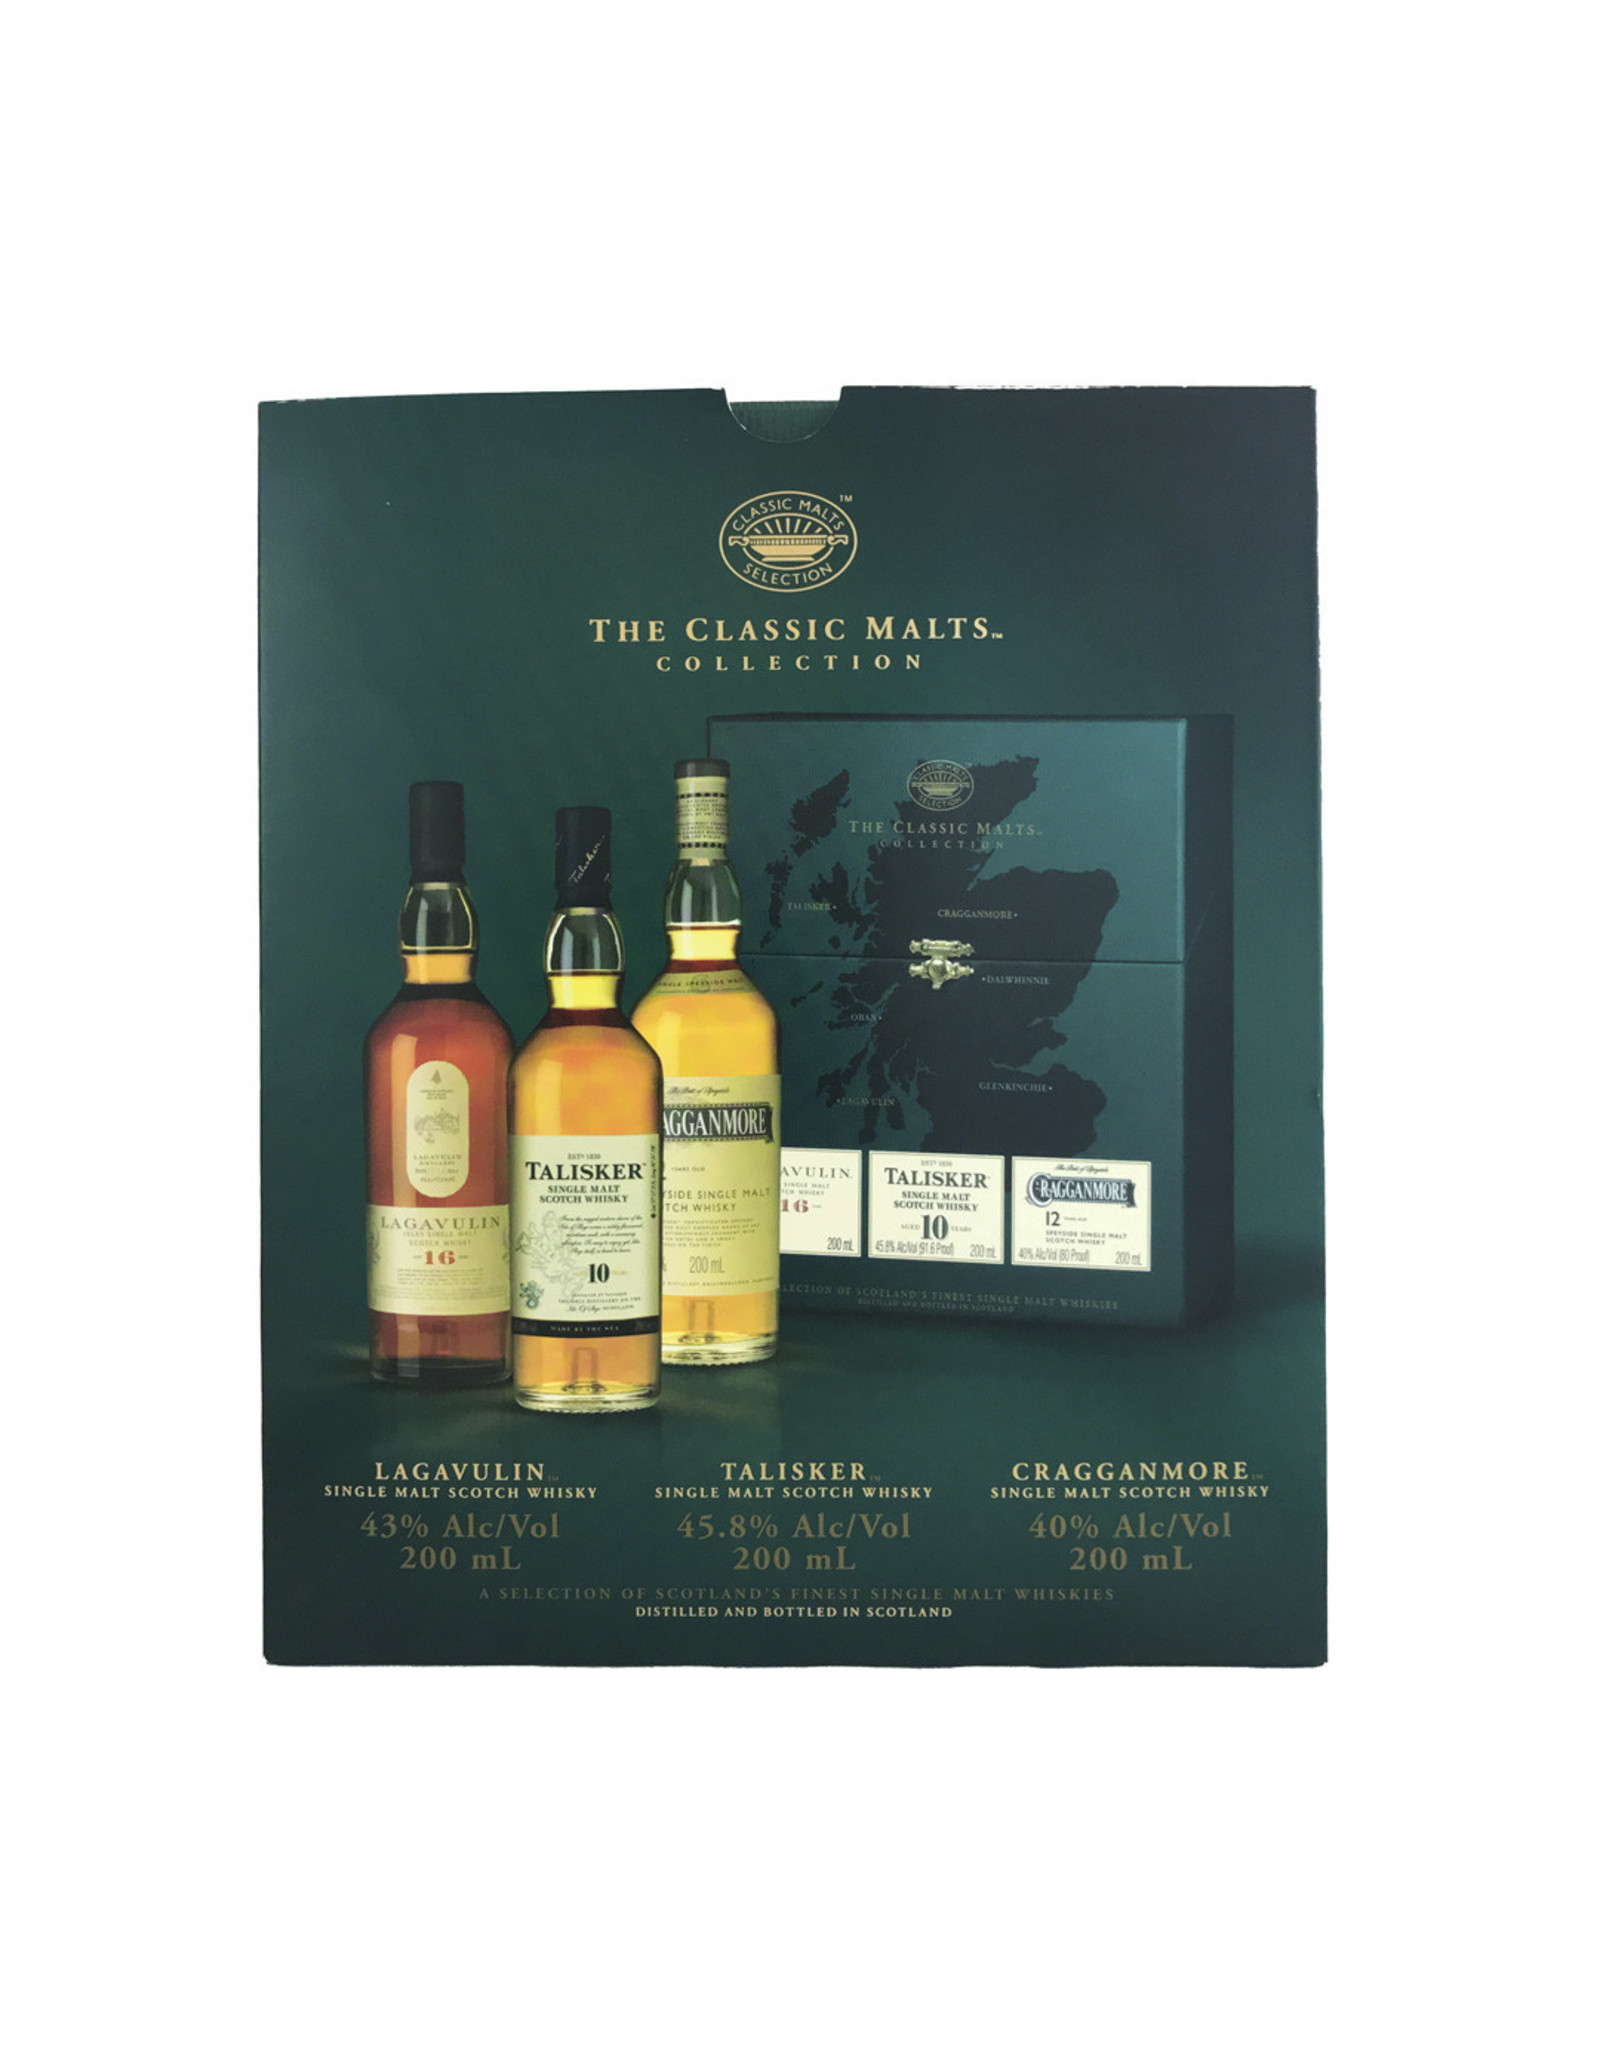 The Classic Malts "Strong" Collection - Lagavulin 16, Talisker 10, Cragganmore 12 (200ml 3pk)